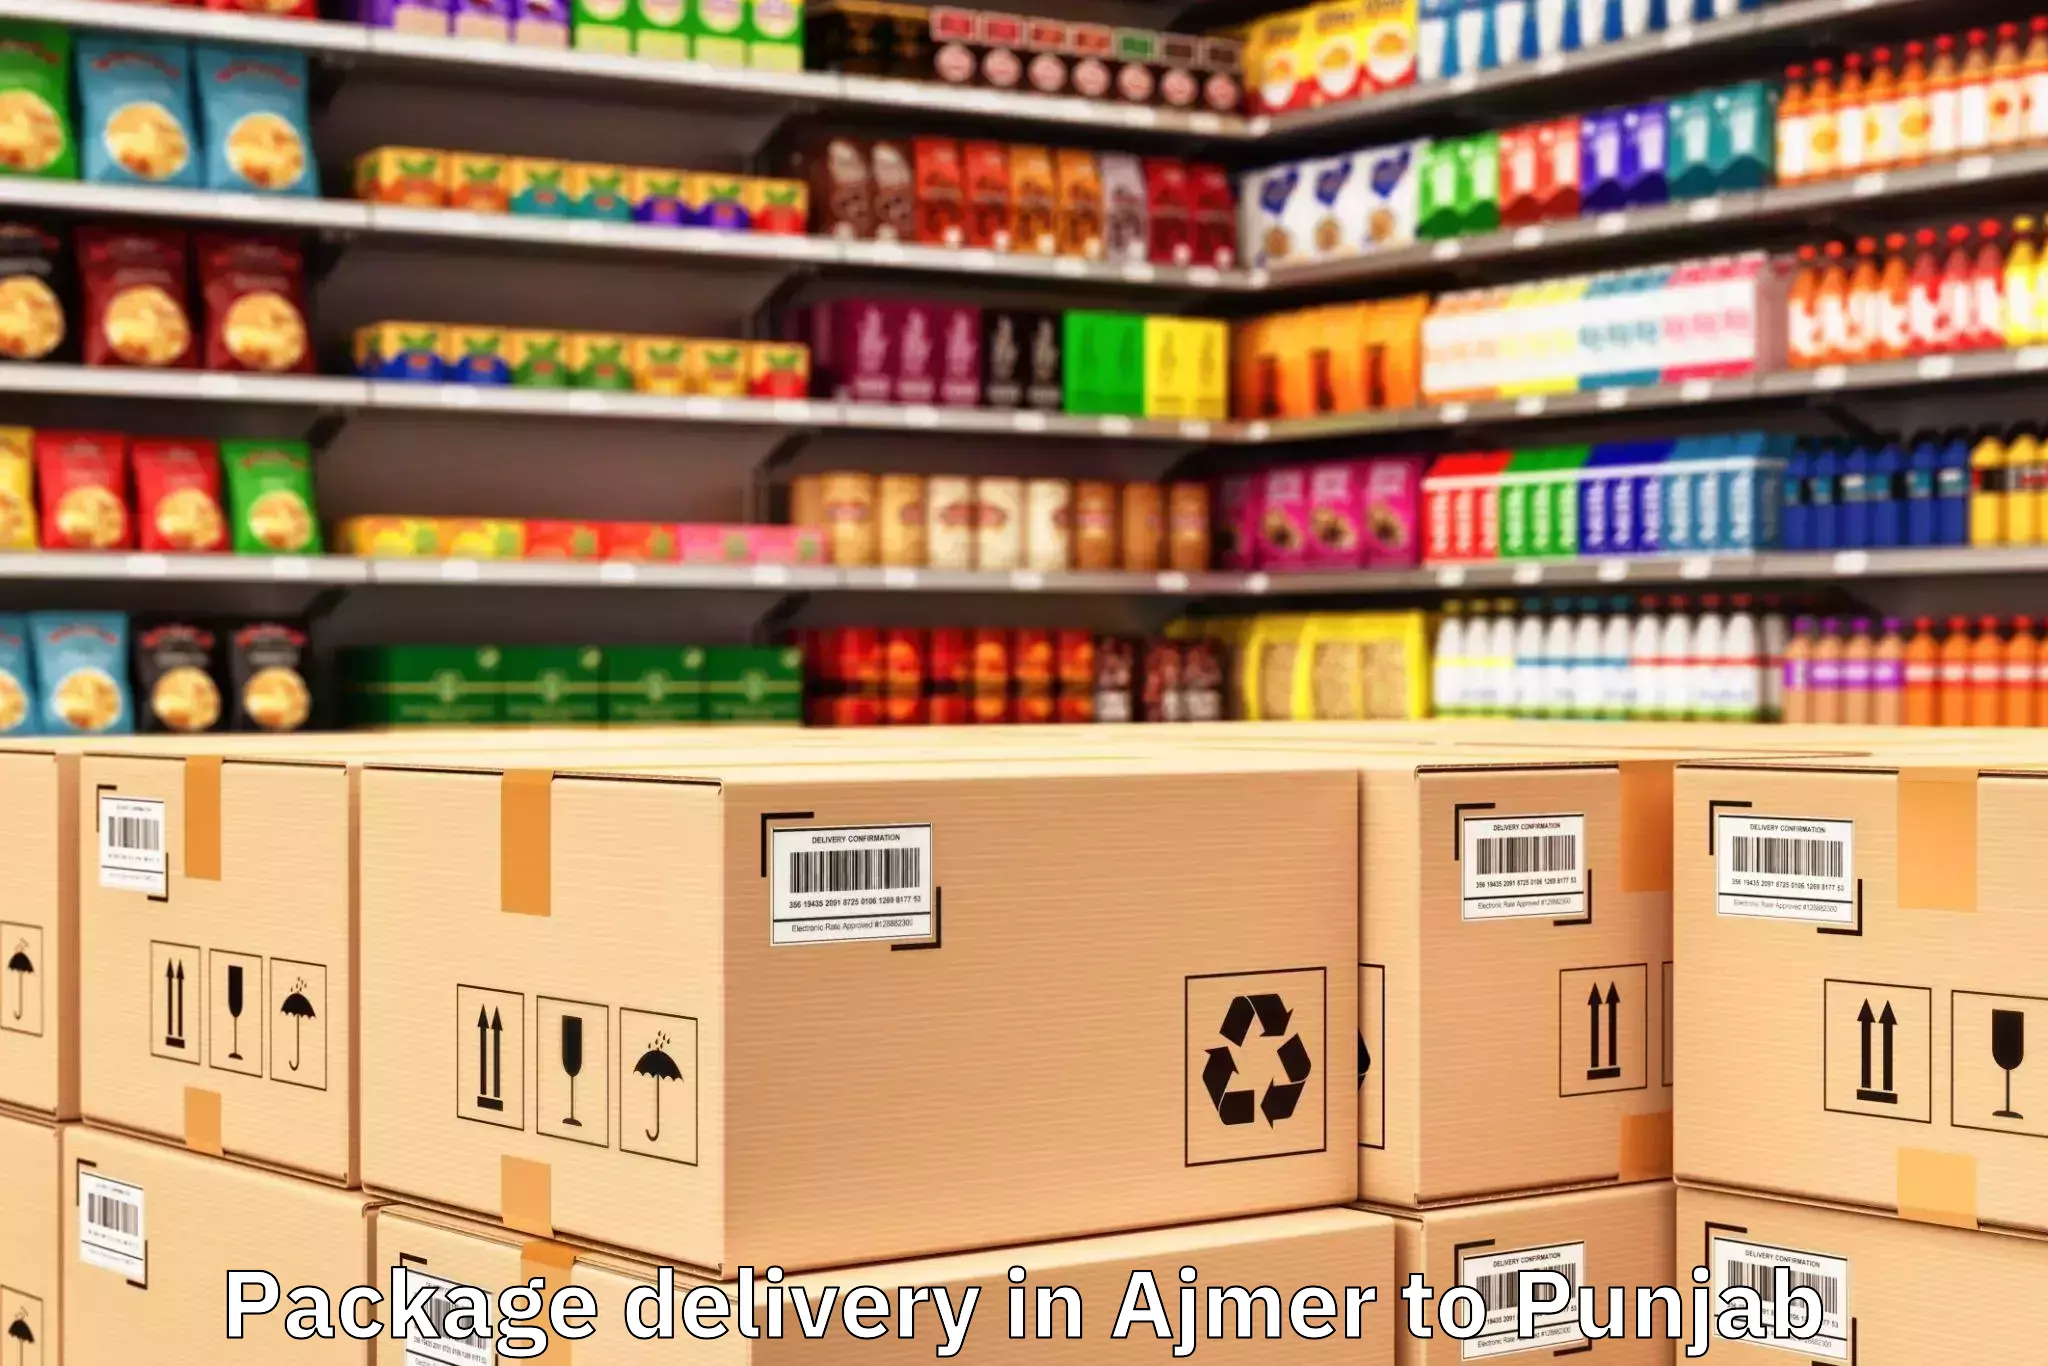 Ajmer to Punjab Package Delivery